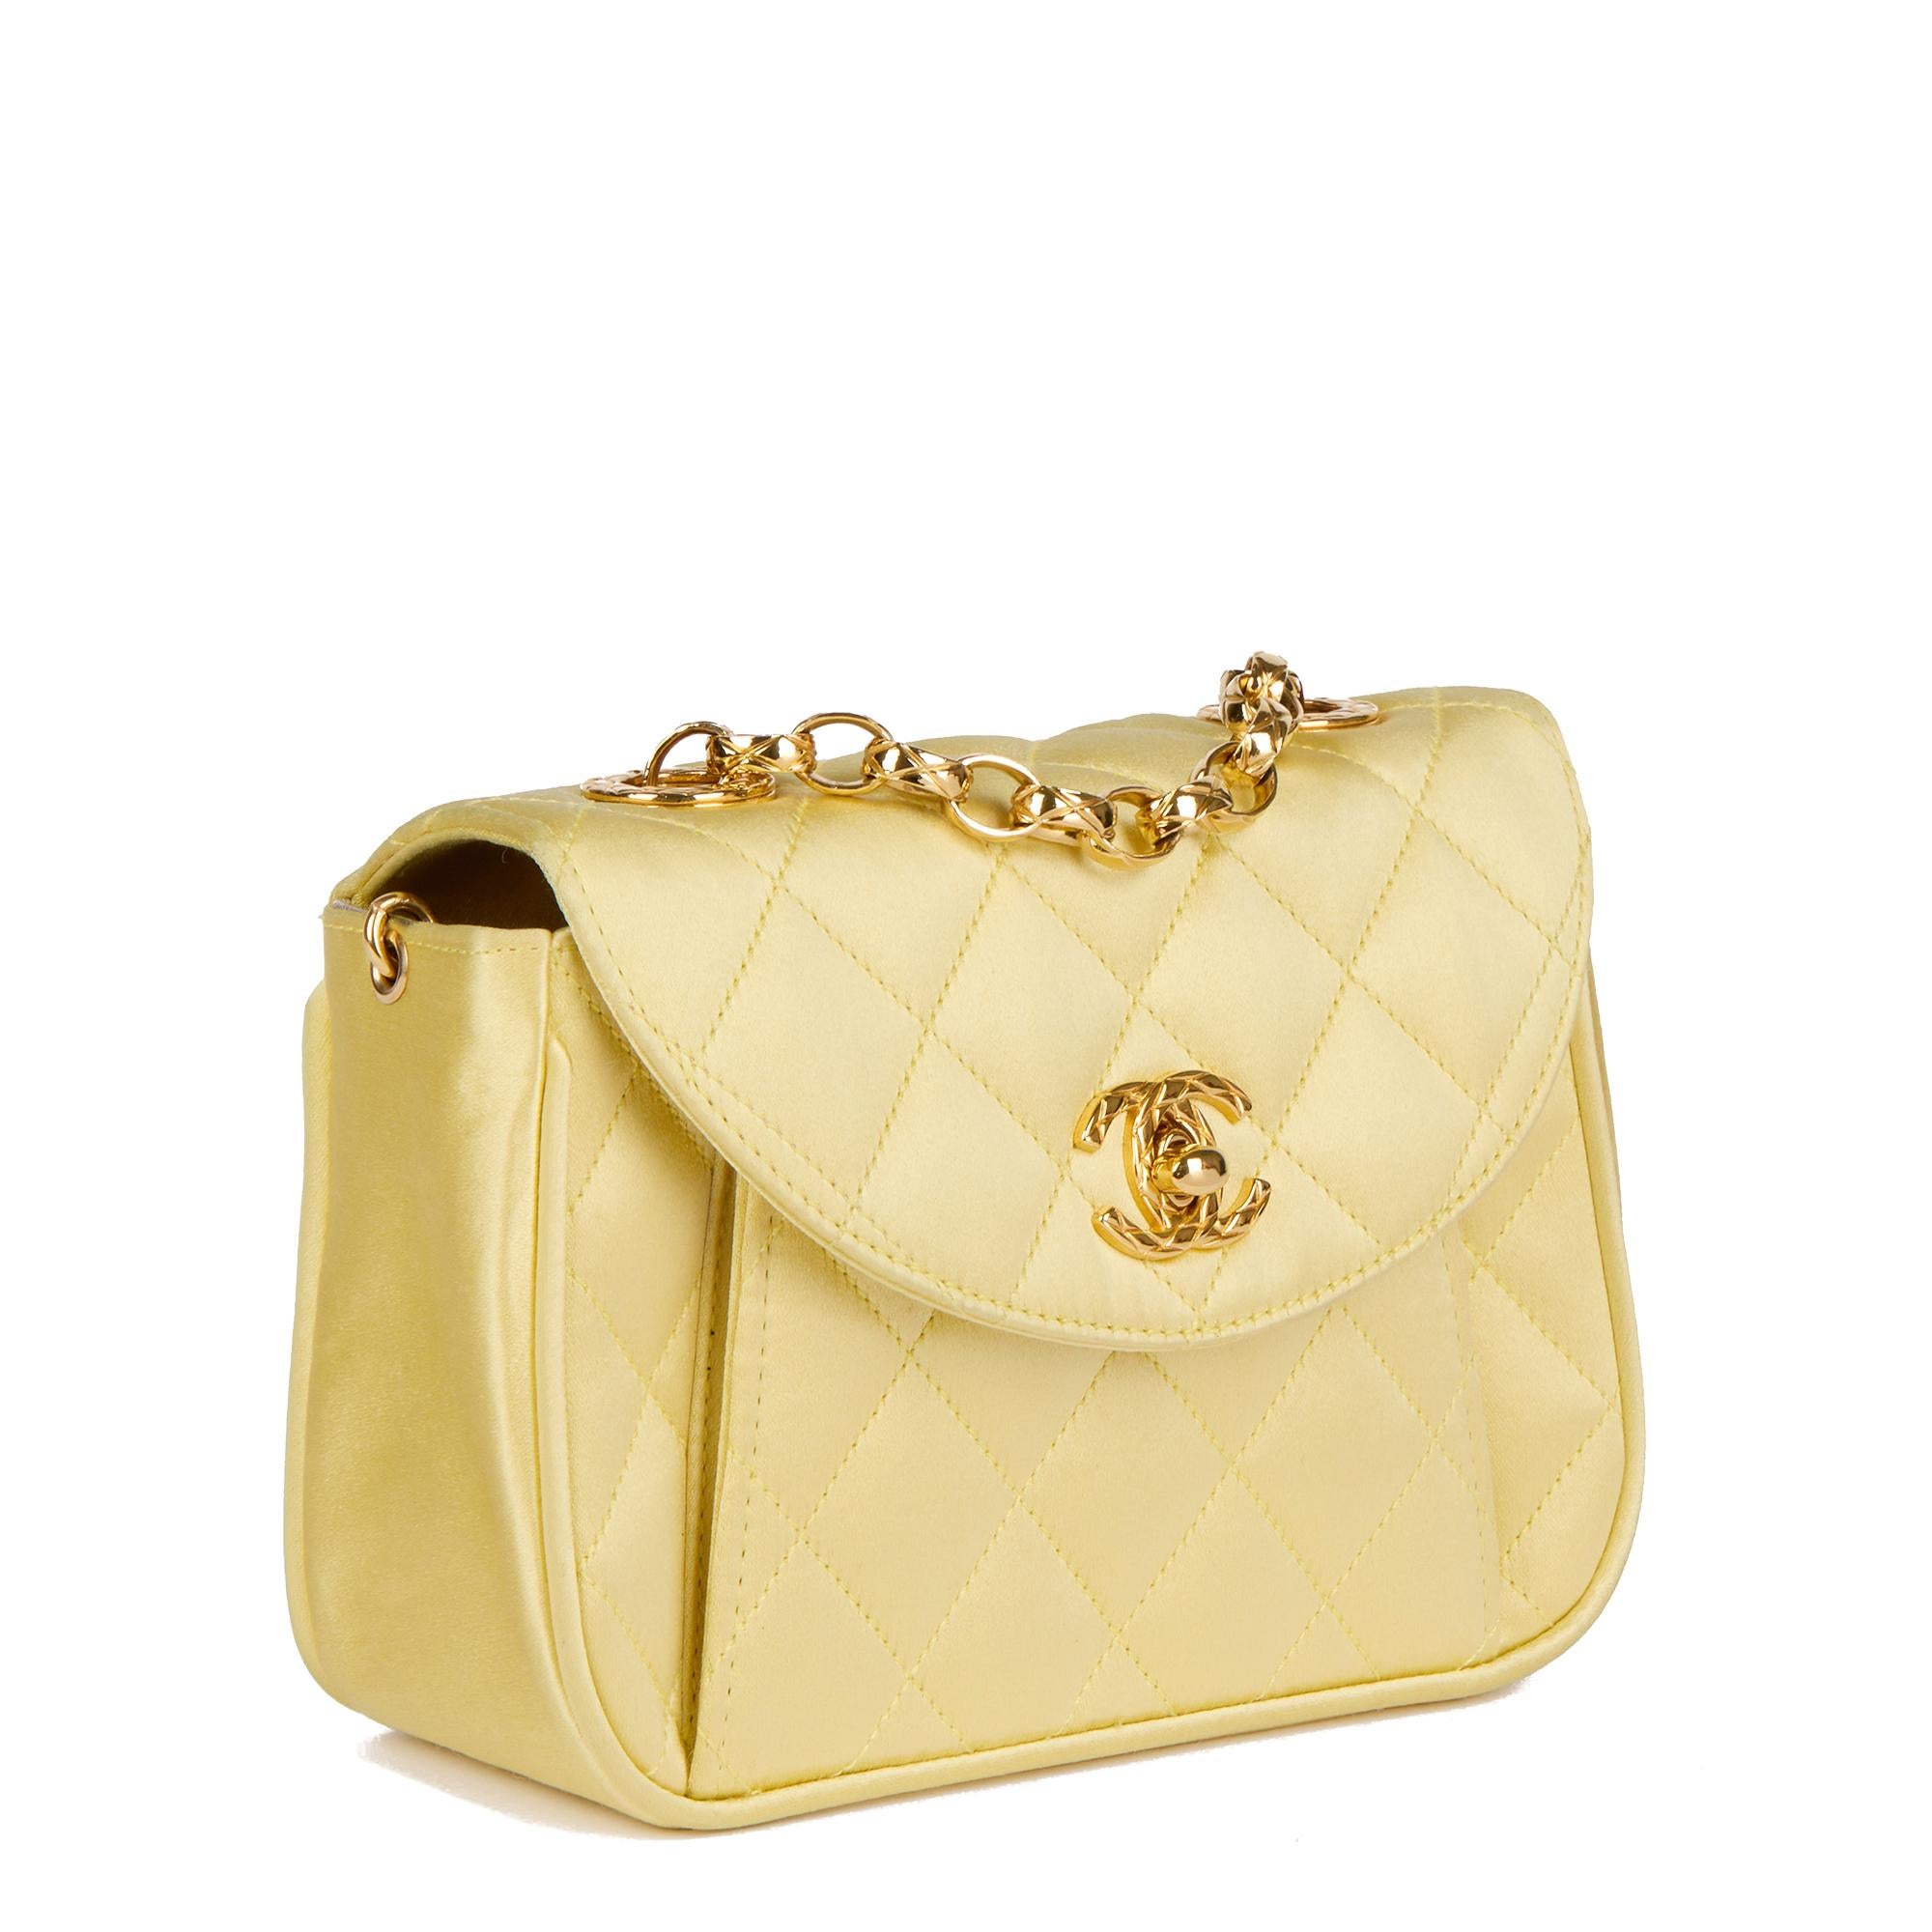 CHANEL
Yellow Quilted Satin Vintage Mini Flap Bag

Serial Number: 2415763
Age (Circa): 1992
Accompanied By: Chanel Dust Bag, Box, Authenticity Card, Ribbon
Authenticity Details: Authenticity Card, Serial Sticker (Made in France)
Gender: Ladies
Type: